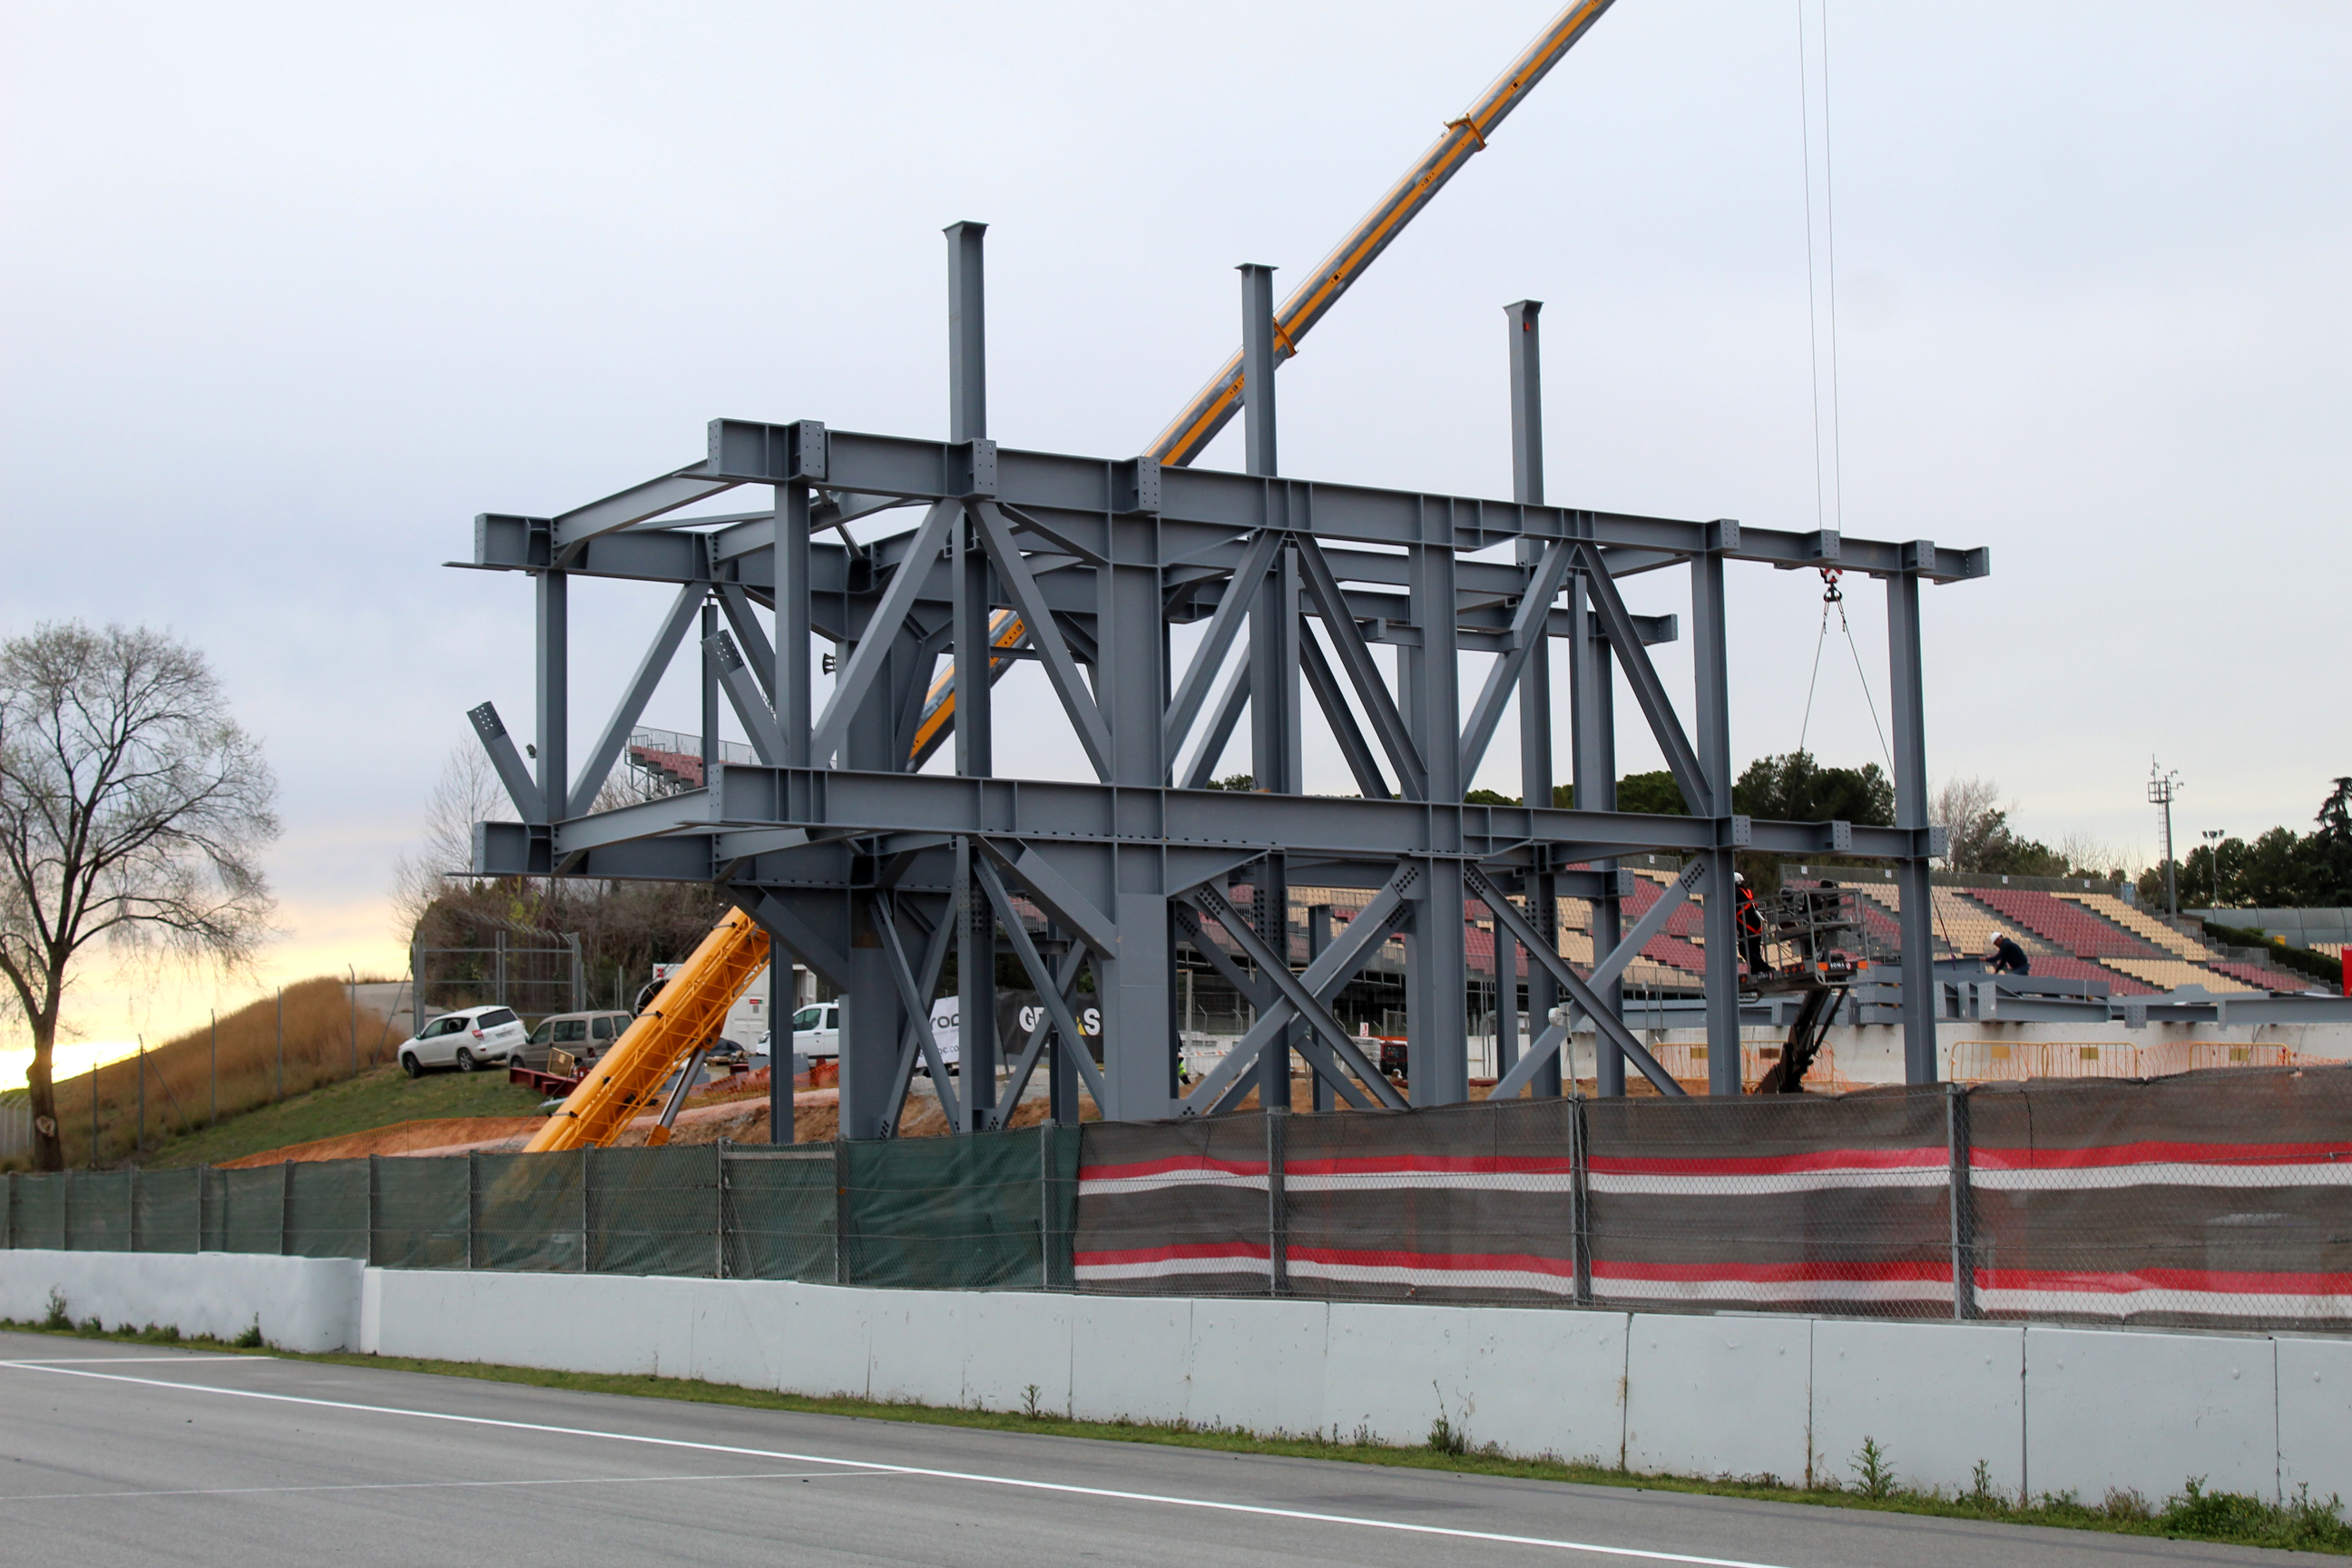 Work continues at Barcelona Circuit